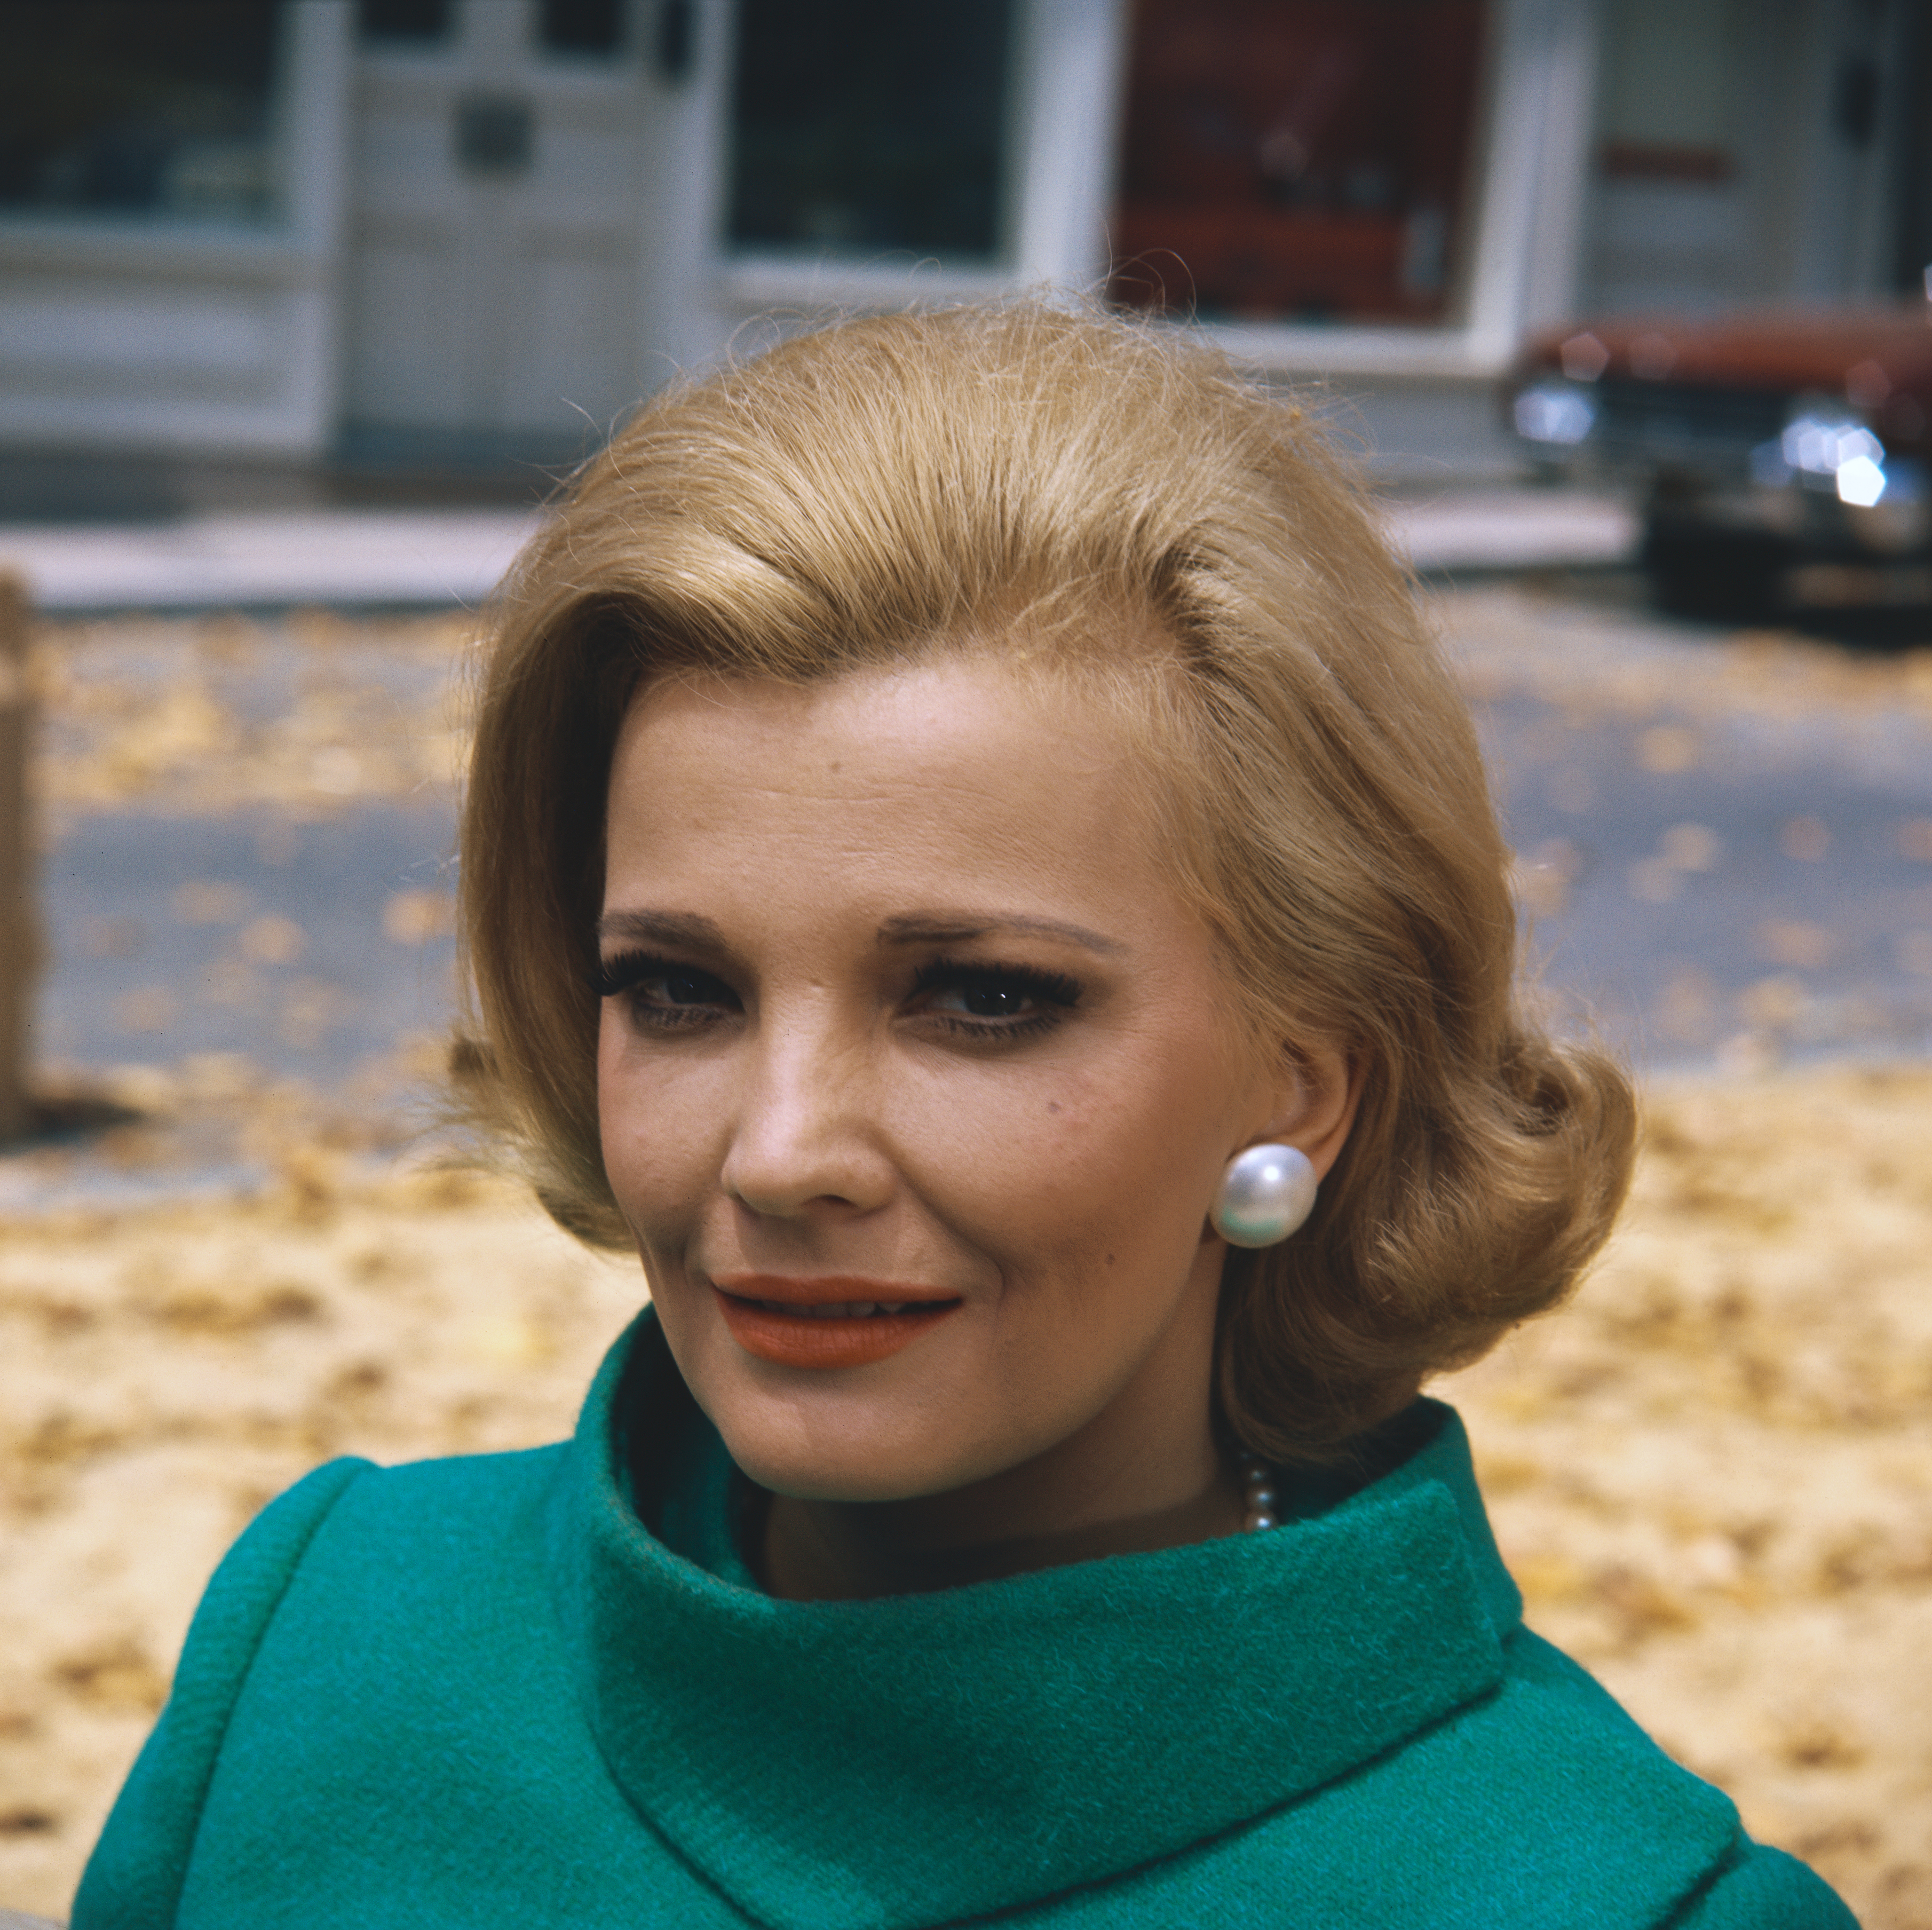 Gena Rowlands in "Peyton Place" in the 1960s | Source: Getty Images